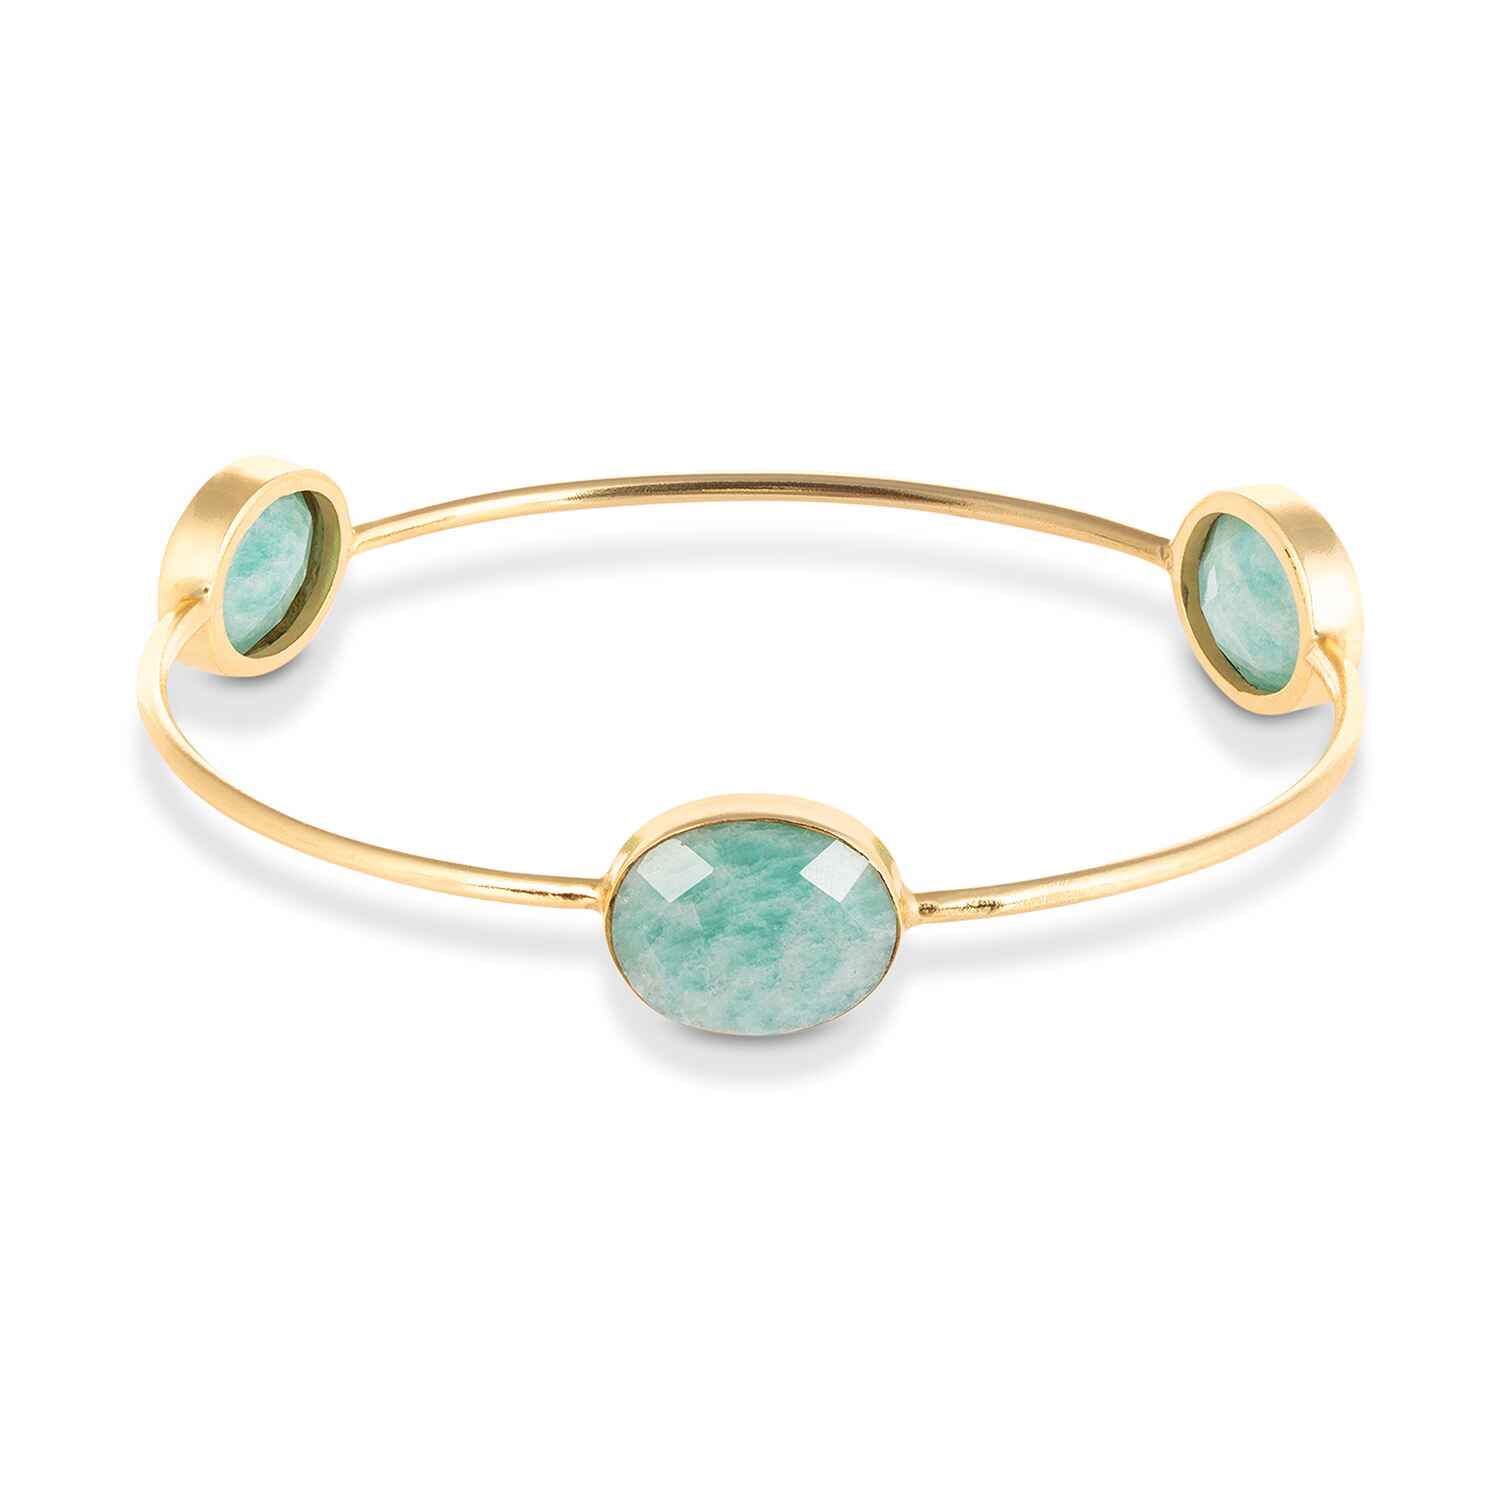 Our Sasha Gold Bangle With Amazonite Gemstones is handmade with recycled materials for minimal environmental impact. Adorned with three stunning vintage Amazonite gemstones, this bangle catches the light with your every move.